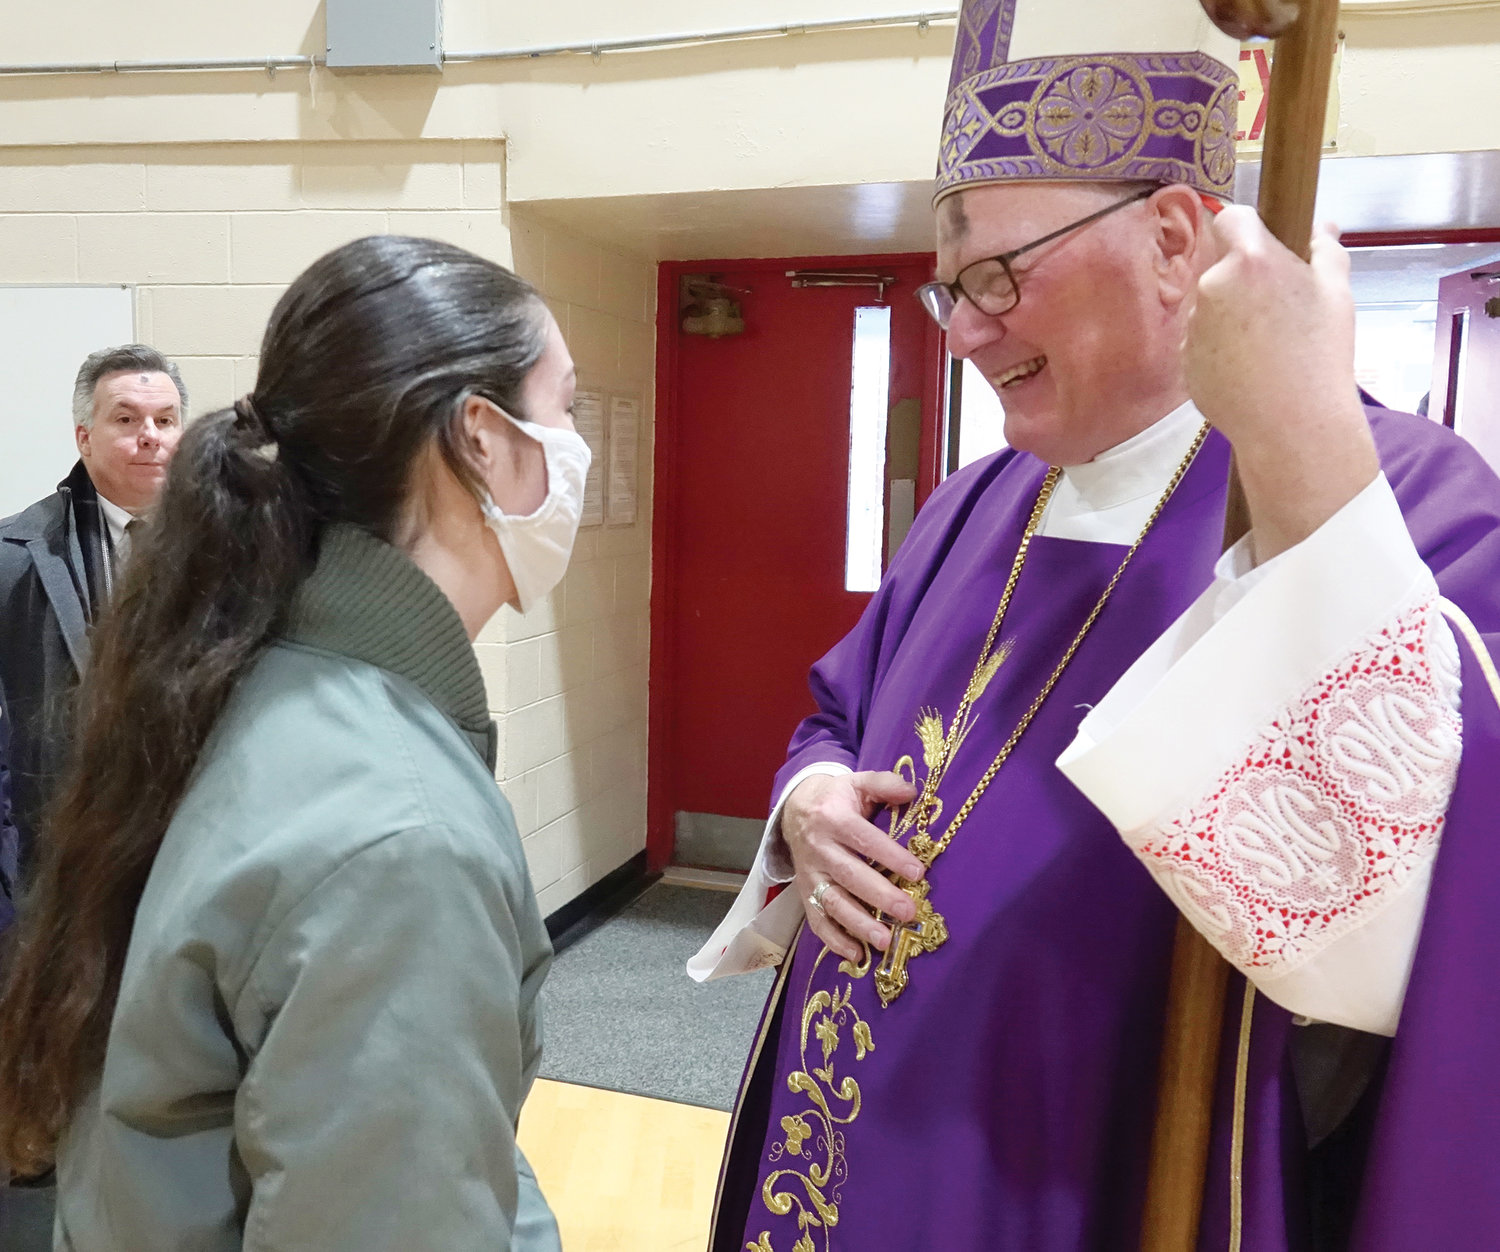 An inmate speaks with Cardinal Dolan.